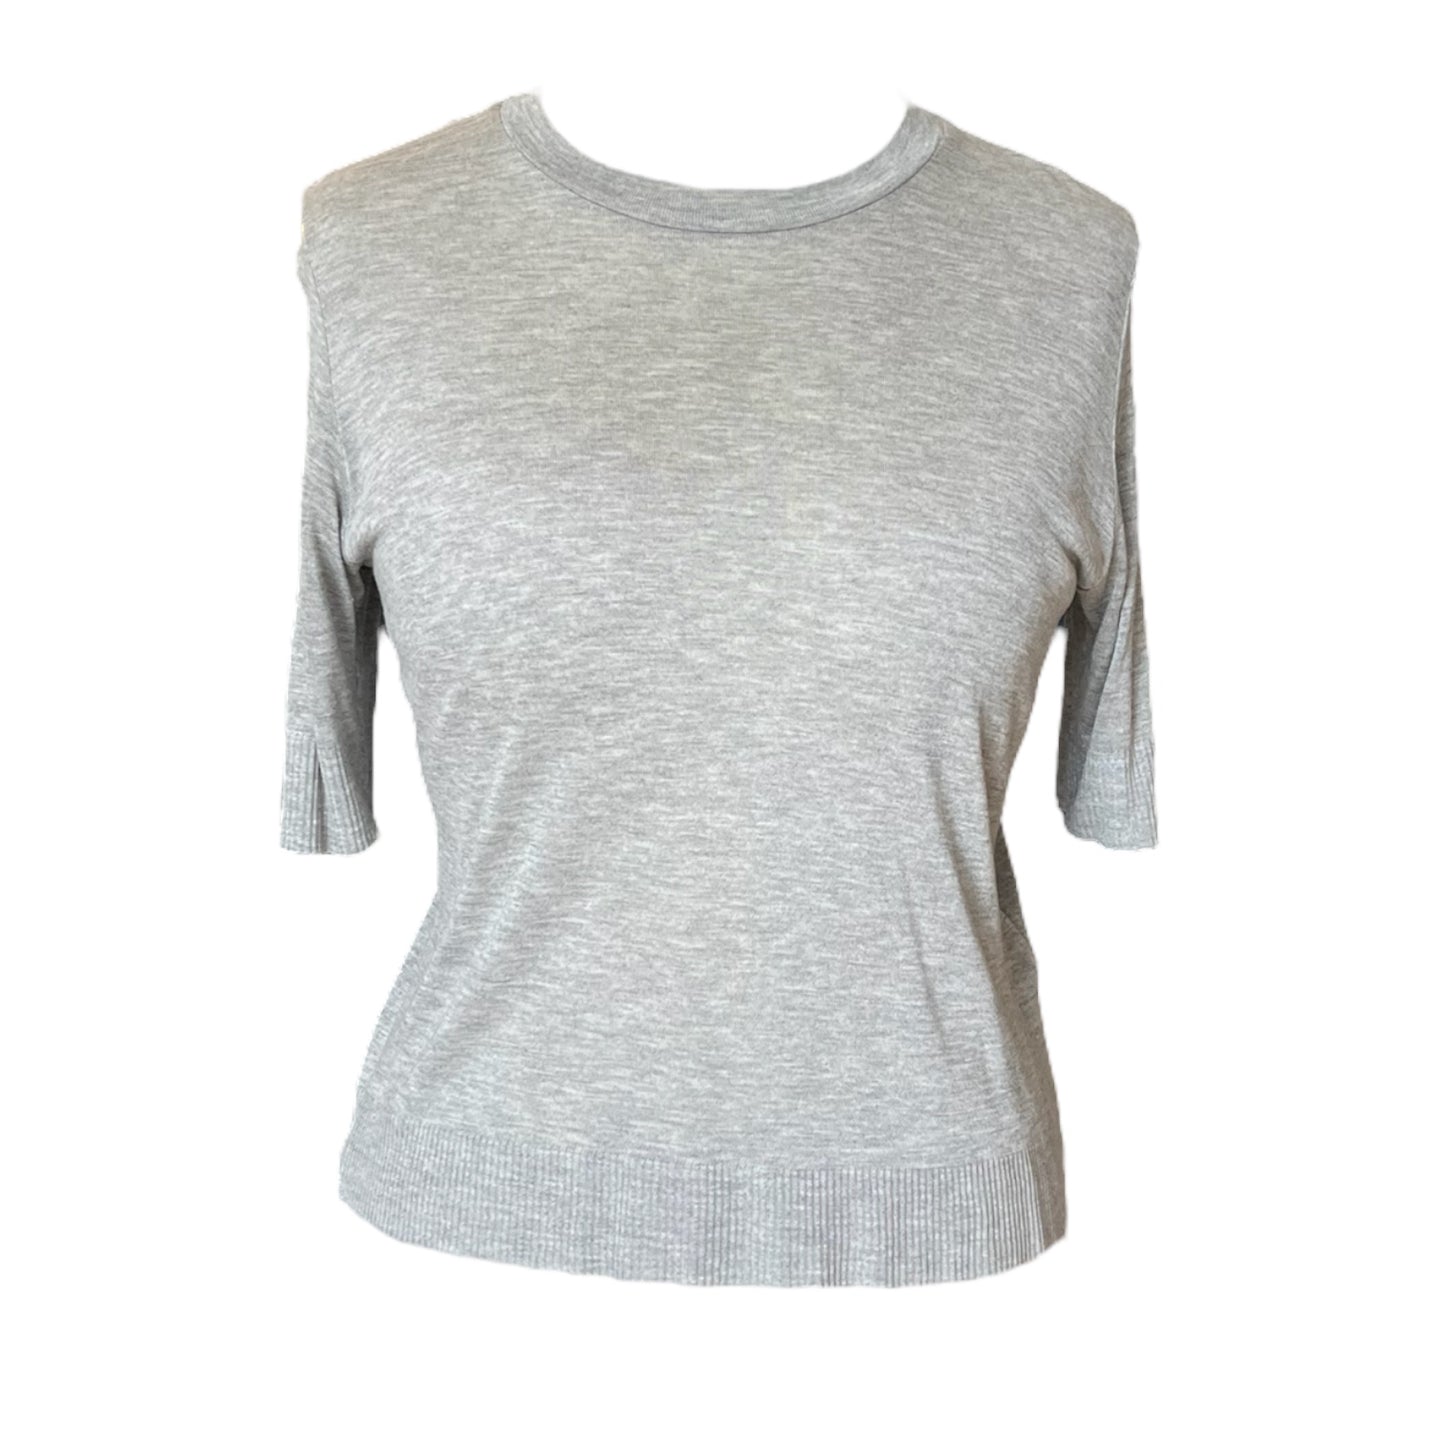 Whistles Grey Knit Top - 12